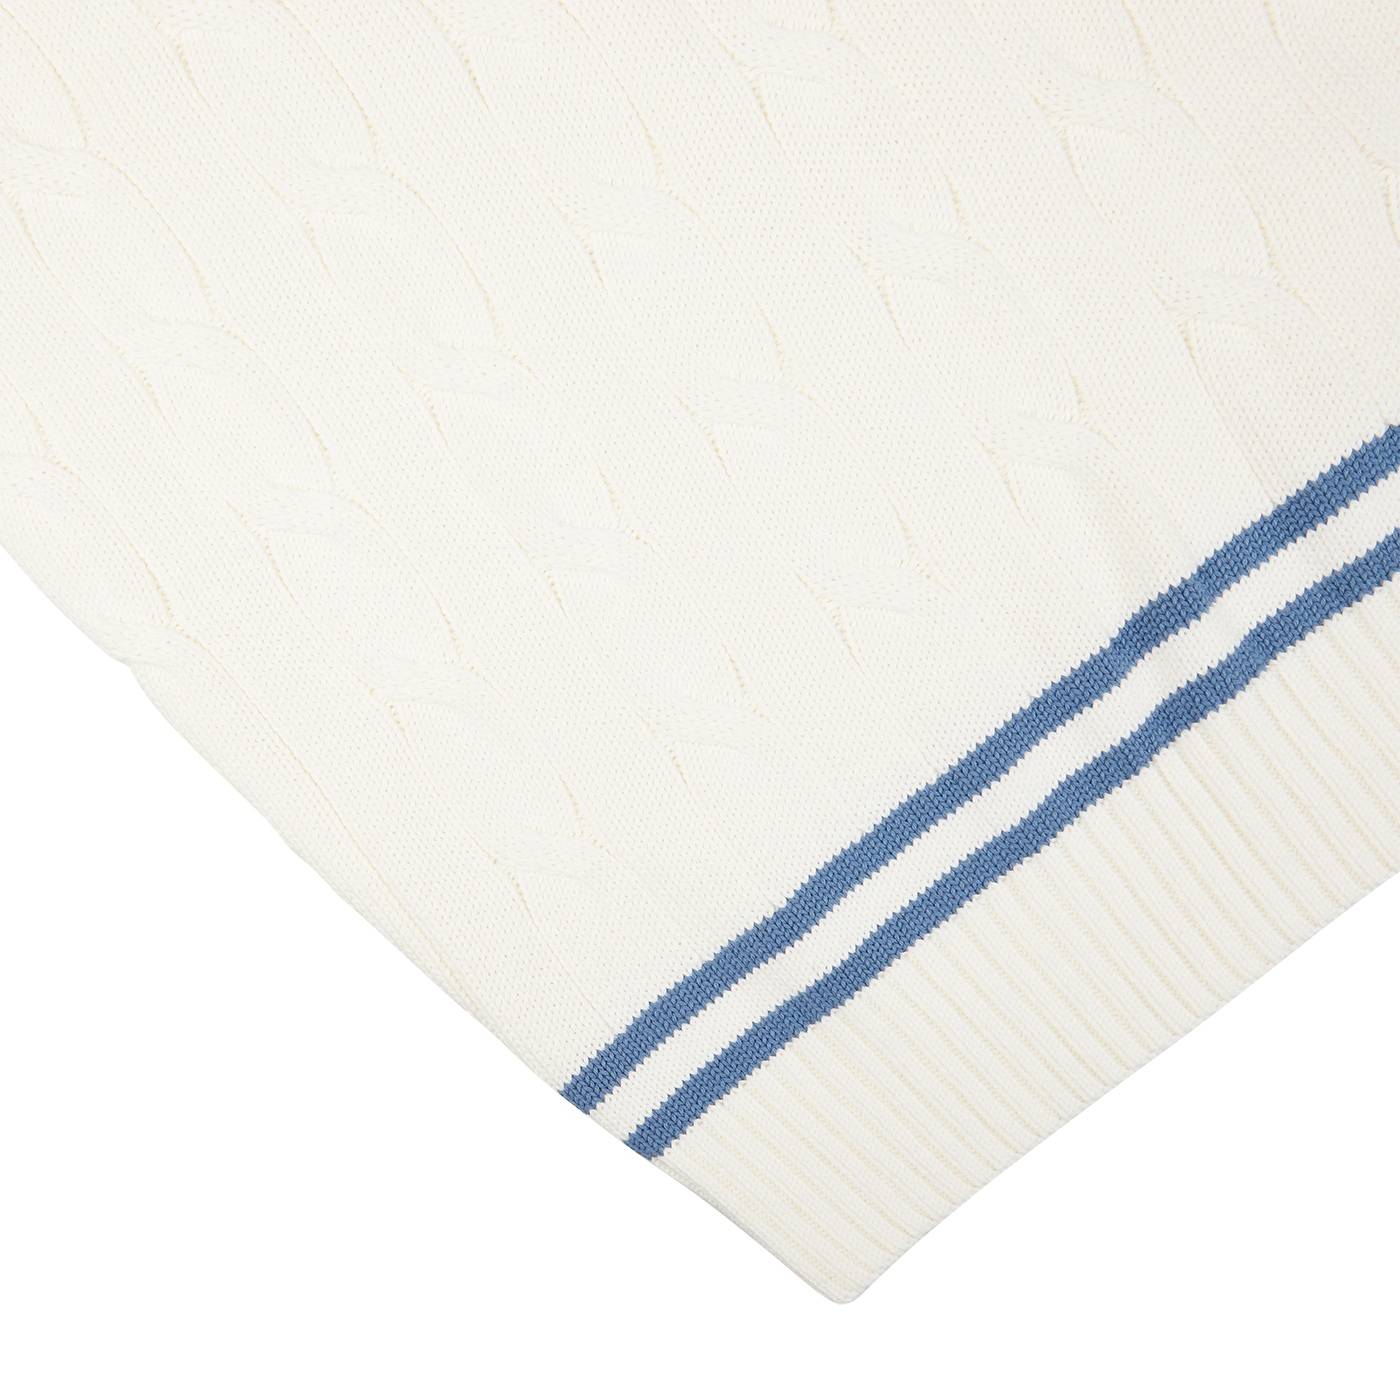 Close-up of an Off-White Blue Striped Cotton Cricket Slipover with a ribbed texture, by Alan Paine.